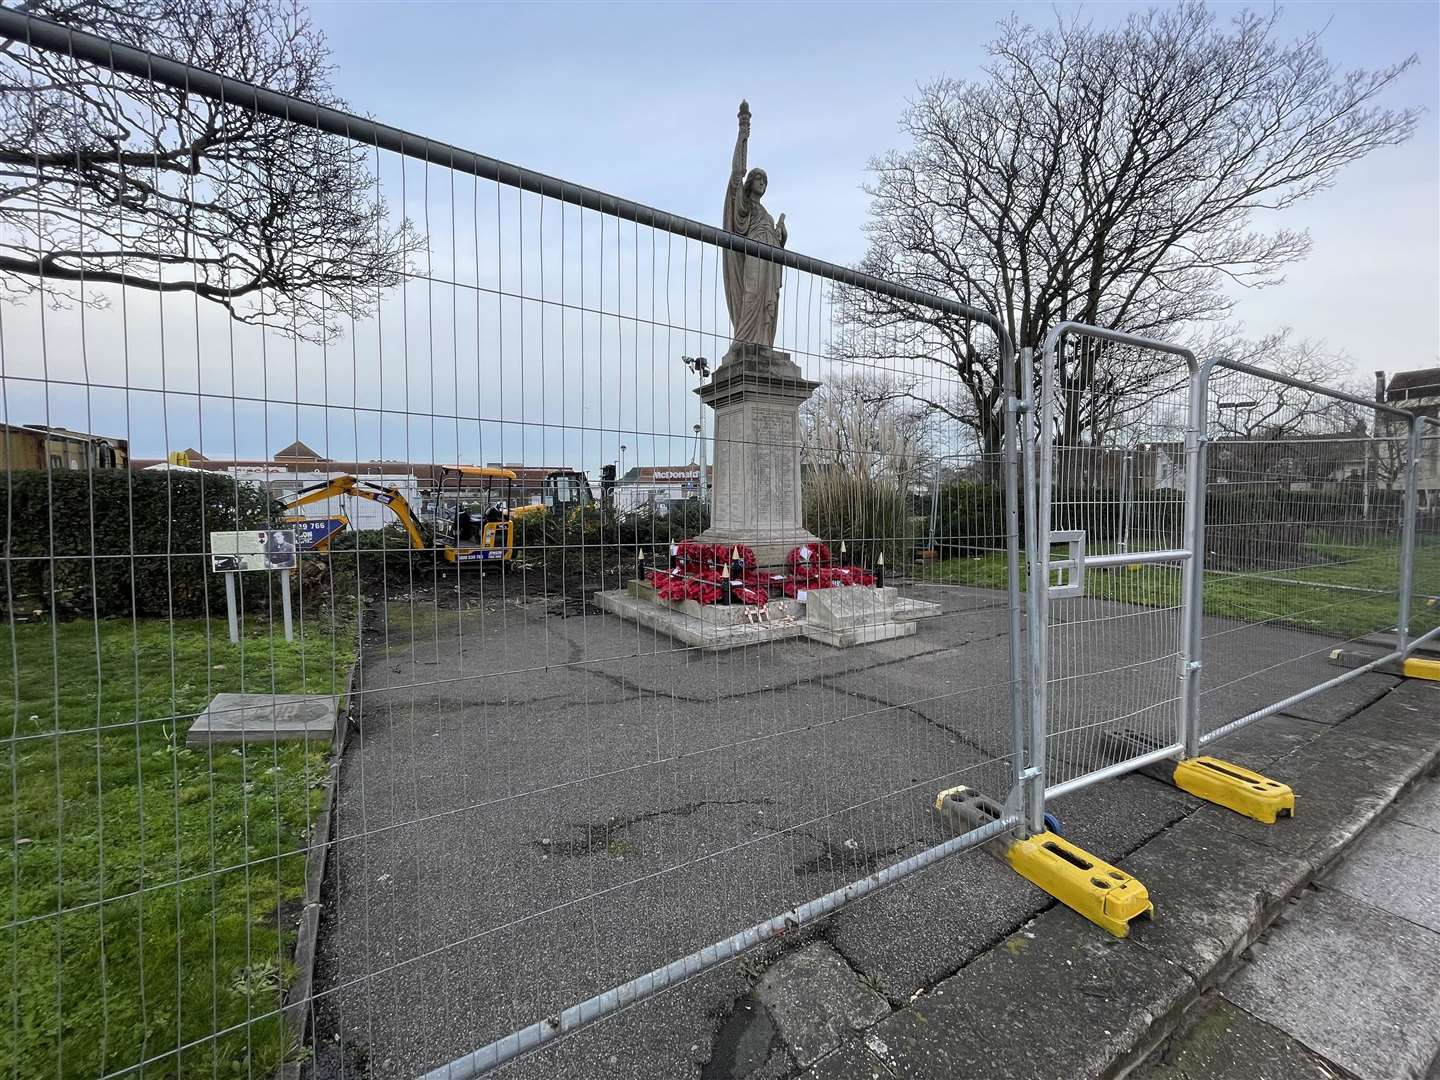 Barriers are up as work begins on the new war wall at Sheerness memorial. Picture: Chloe Holmwood